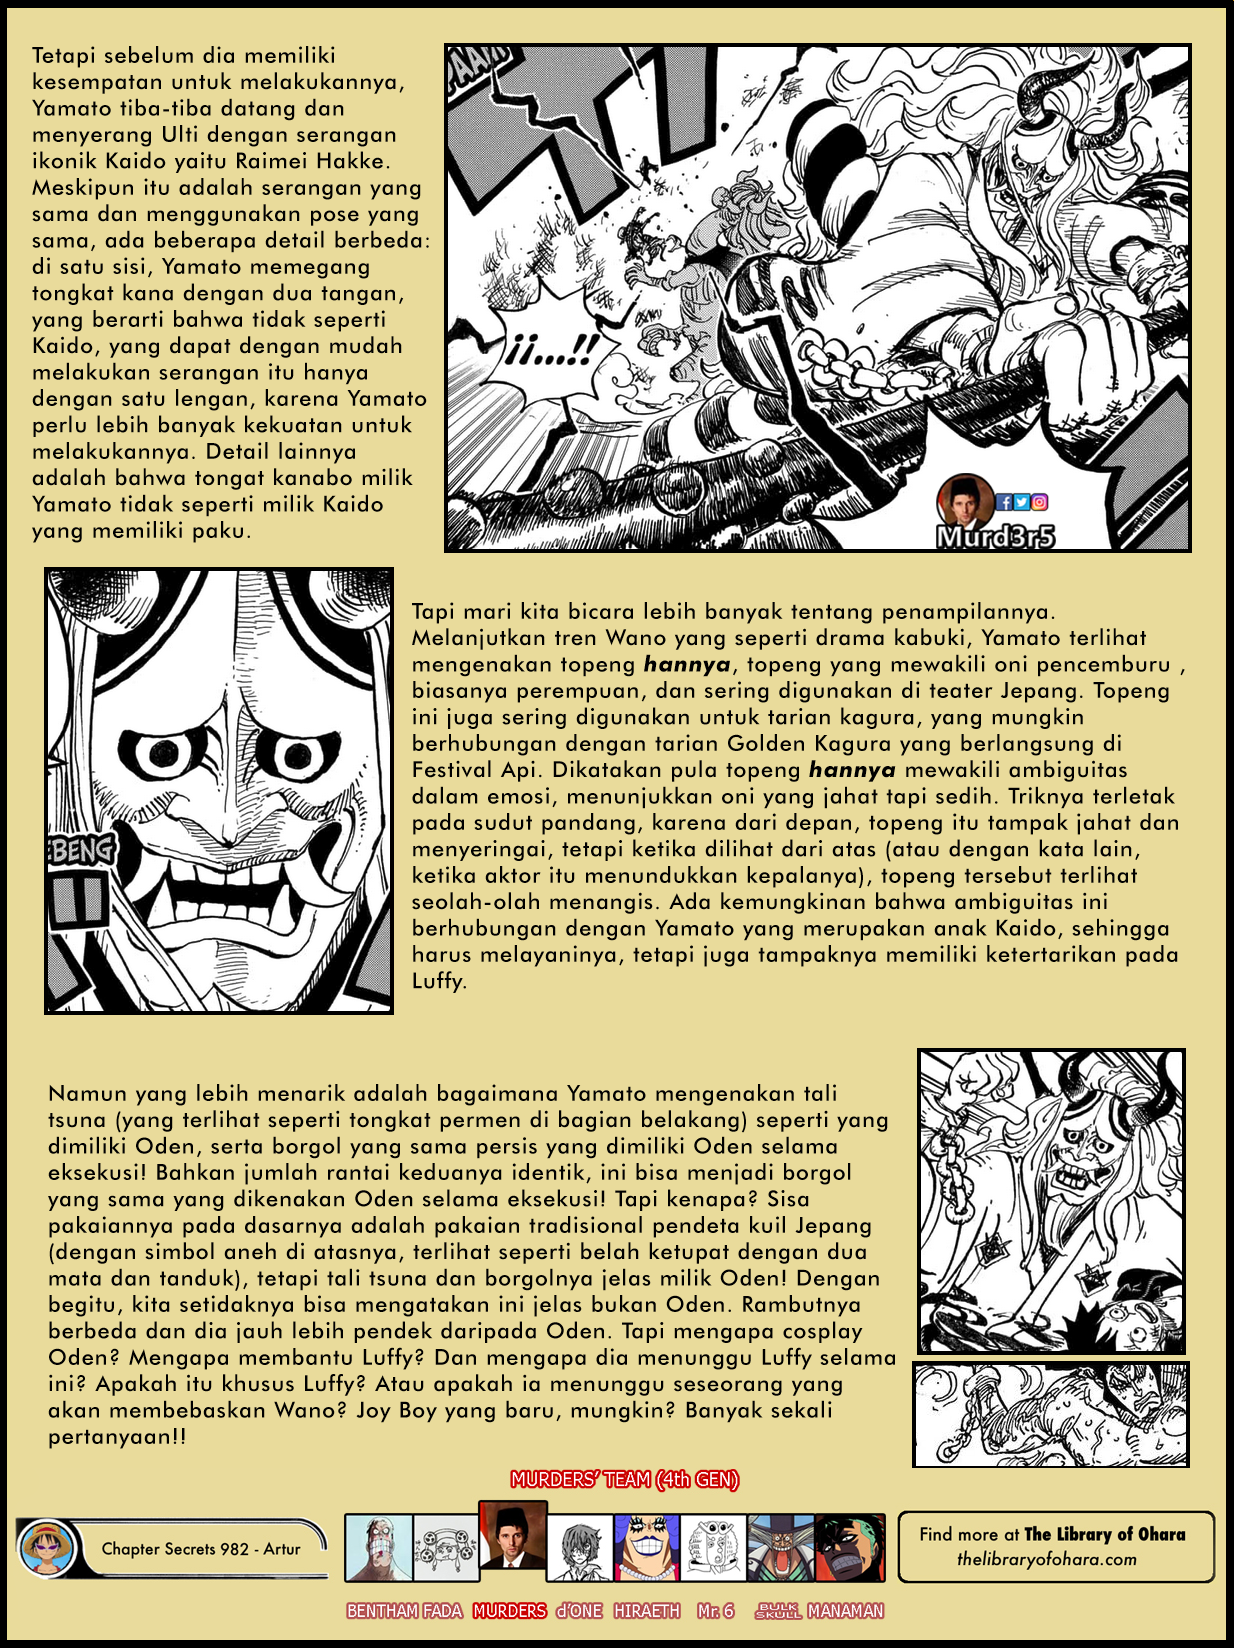 one-piece-chapter-983-analysis-5-1